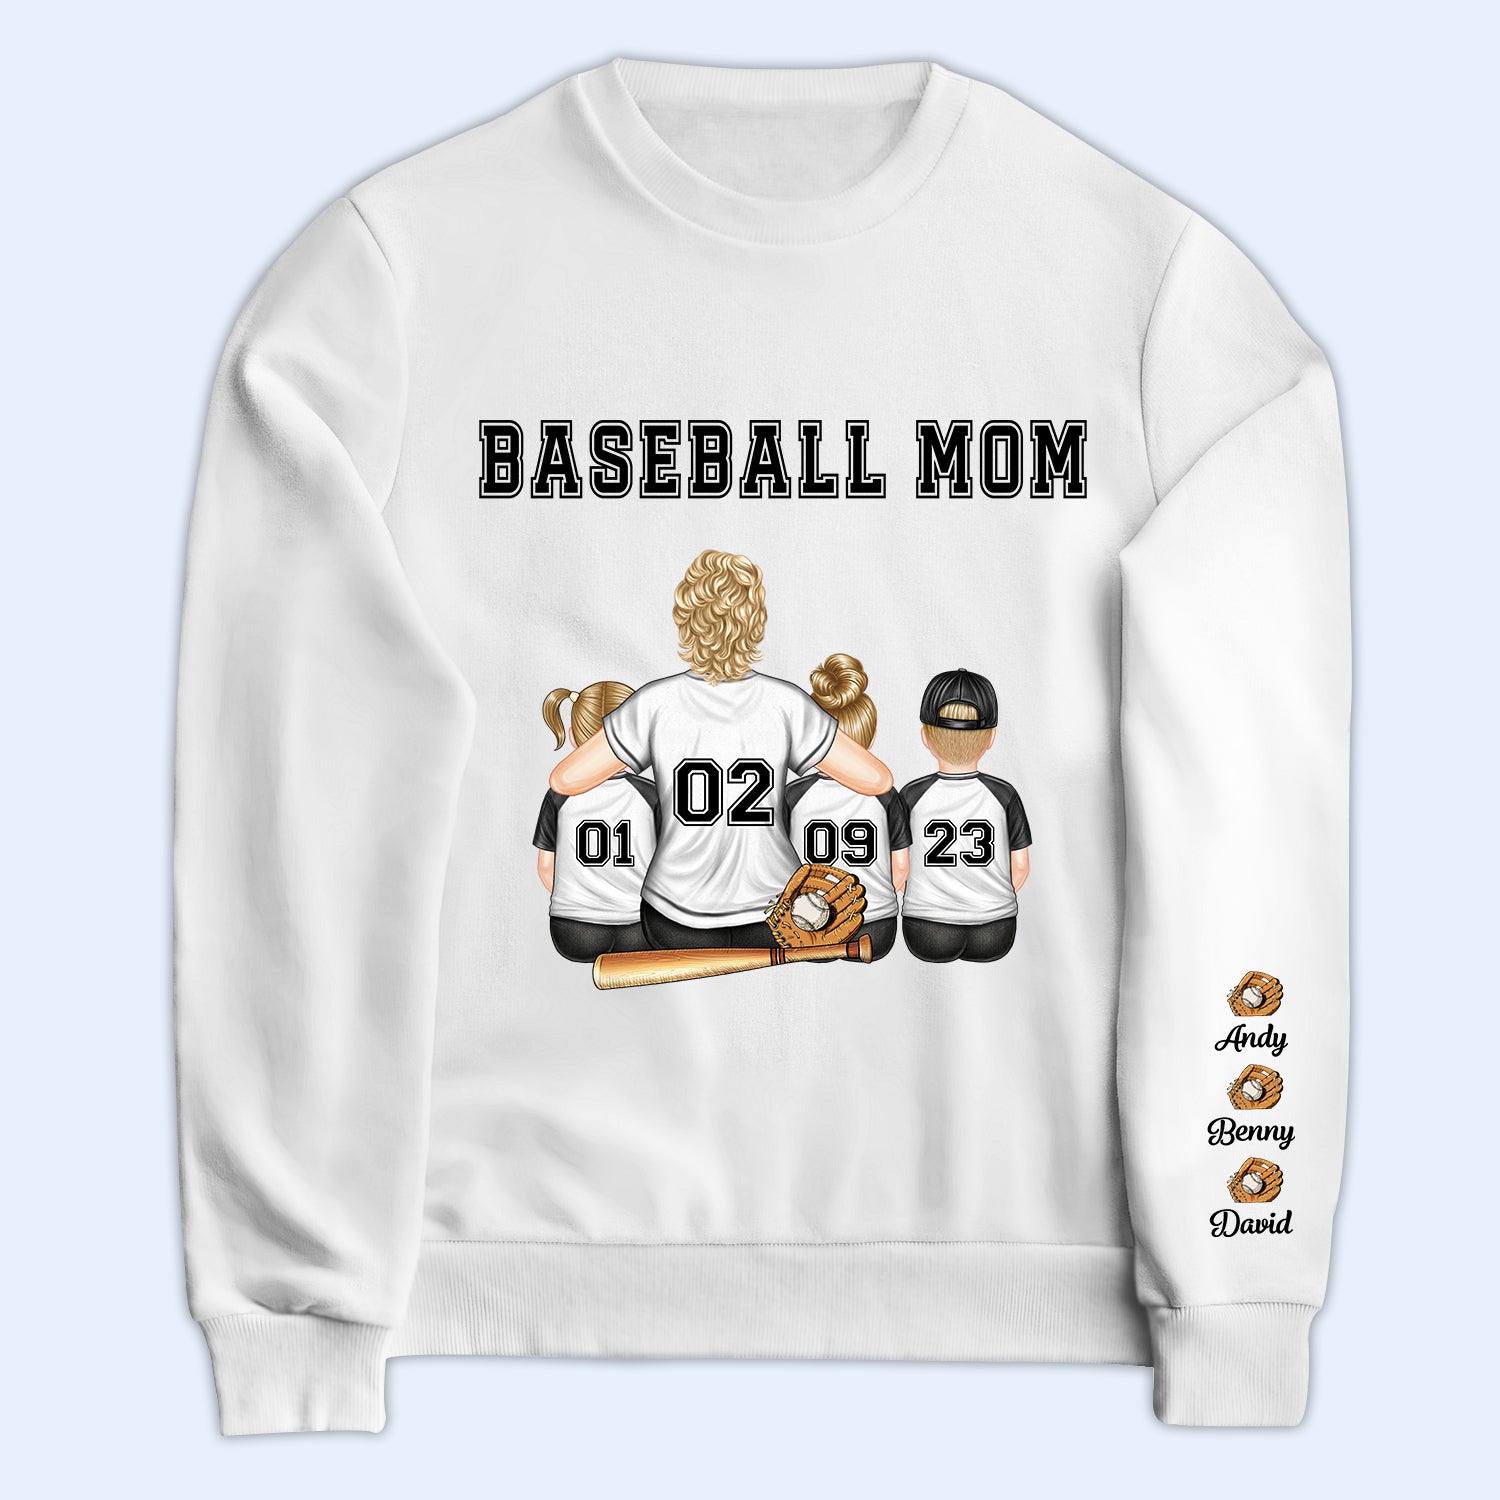 Baseball Mom - Gift For Mother - Personalized Sweatshirt With Sleeve Imprint